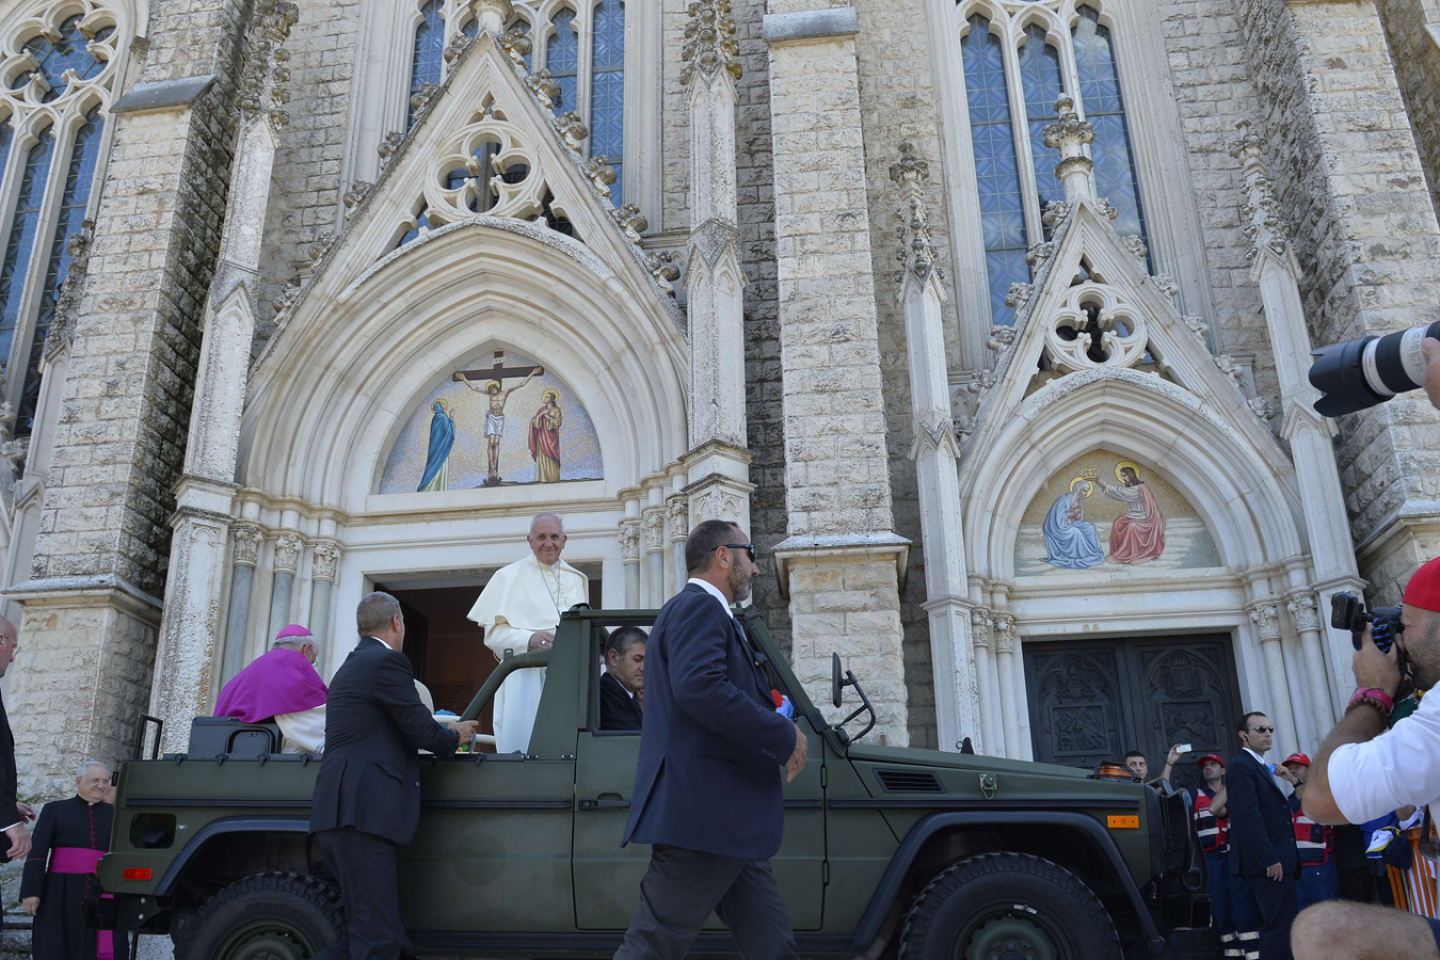 A popemobile that's open to the people